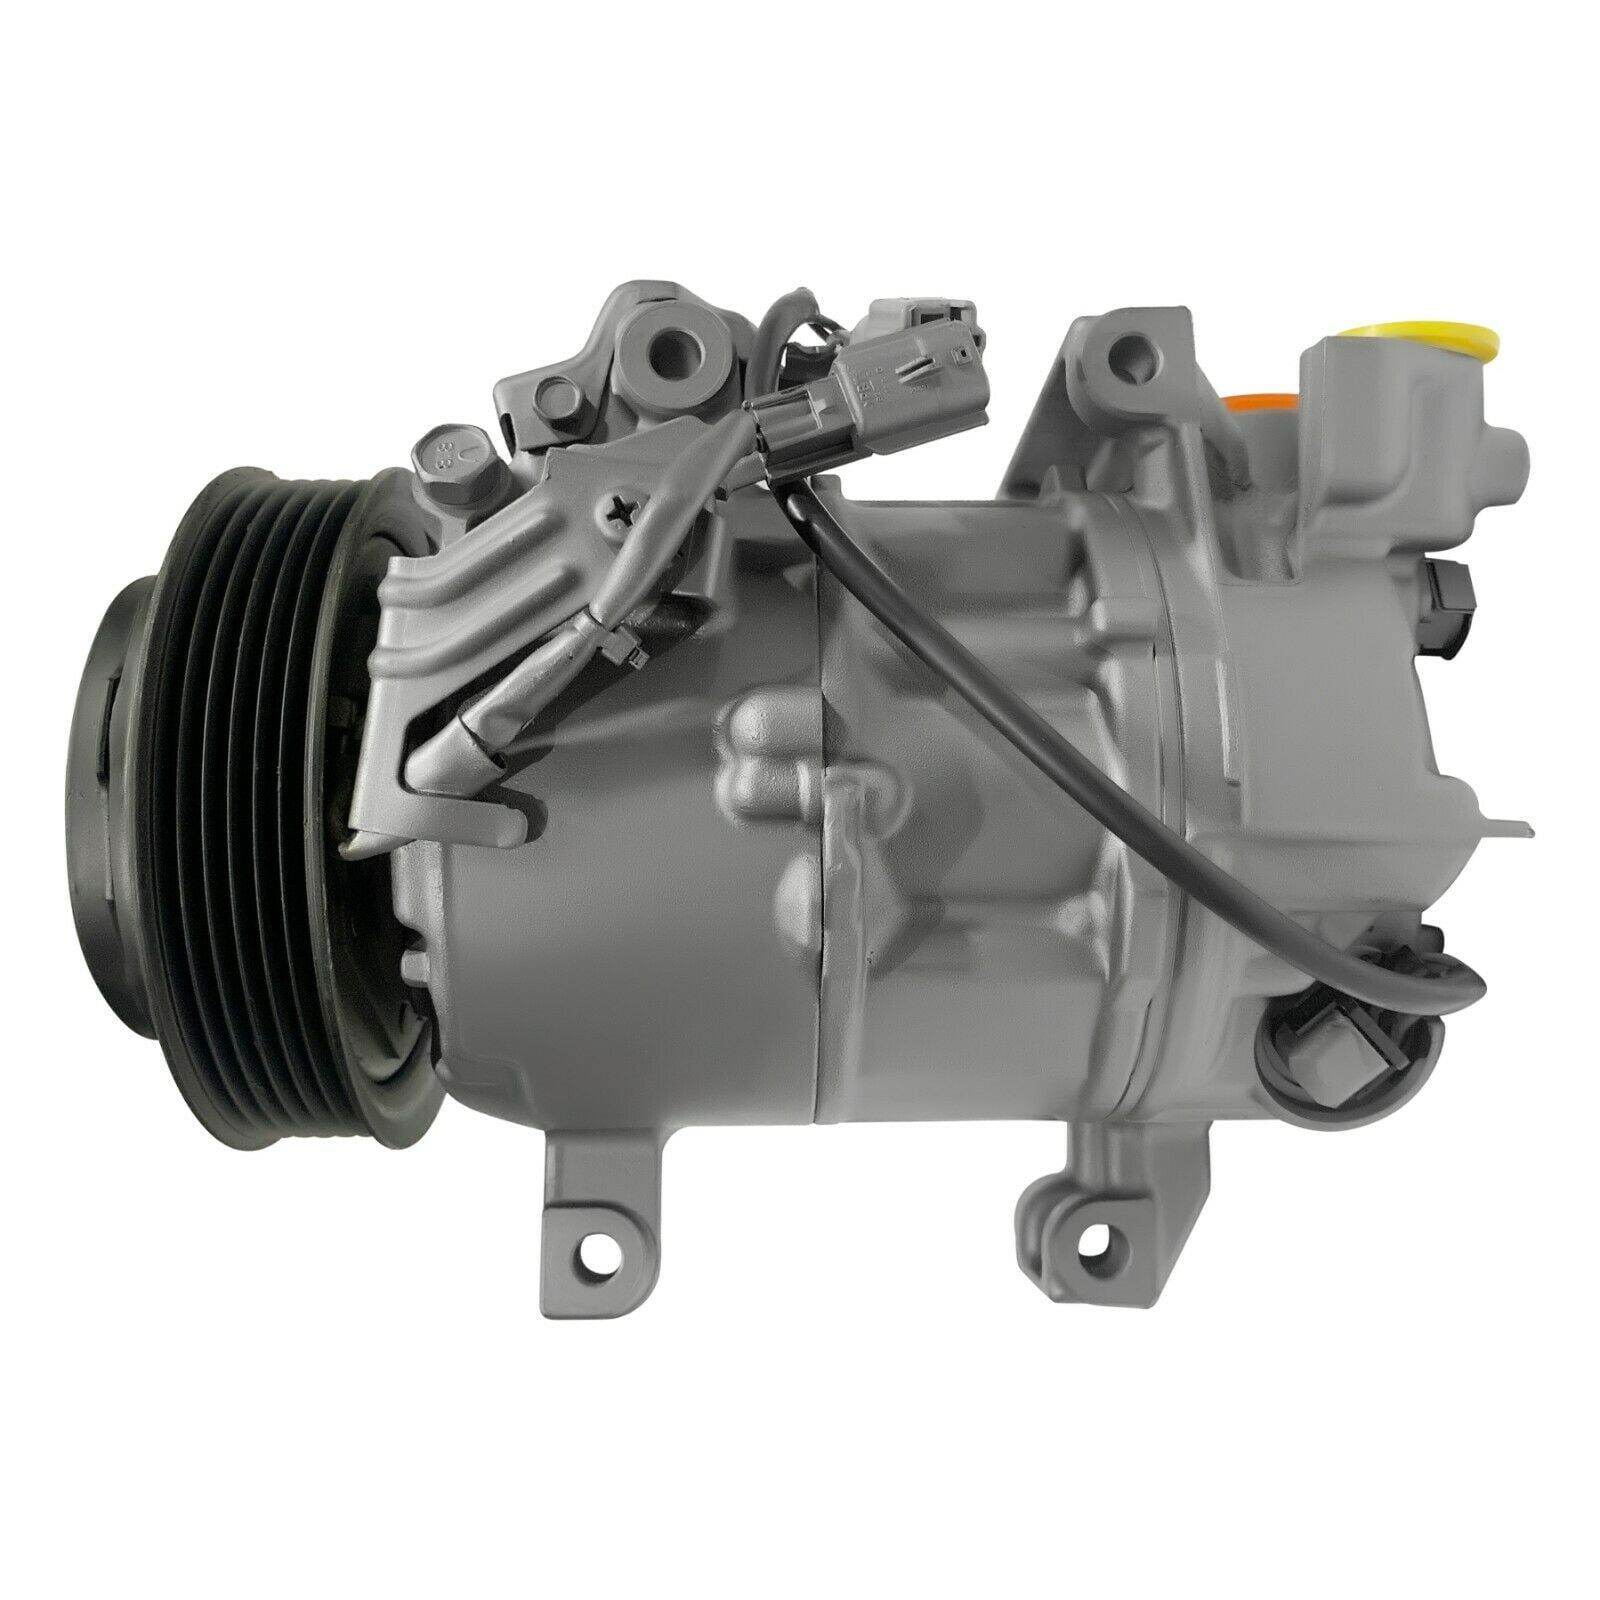 RYC New AC Compressor and A/C Clutch IH585 ONLY Fits Nissan Sentra 1.8L 2013-2019. DOES NOT FIT Infiniti QX50 2.0L 2019-2020 and DOES NOT FIT Nissan Rogue Sport Models 